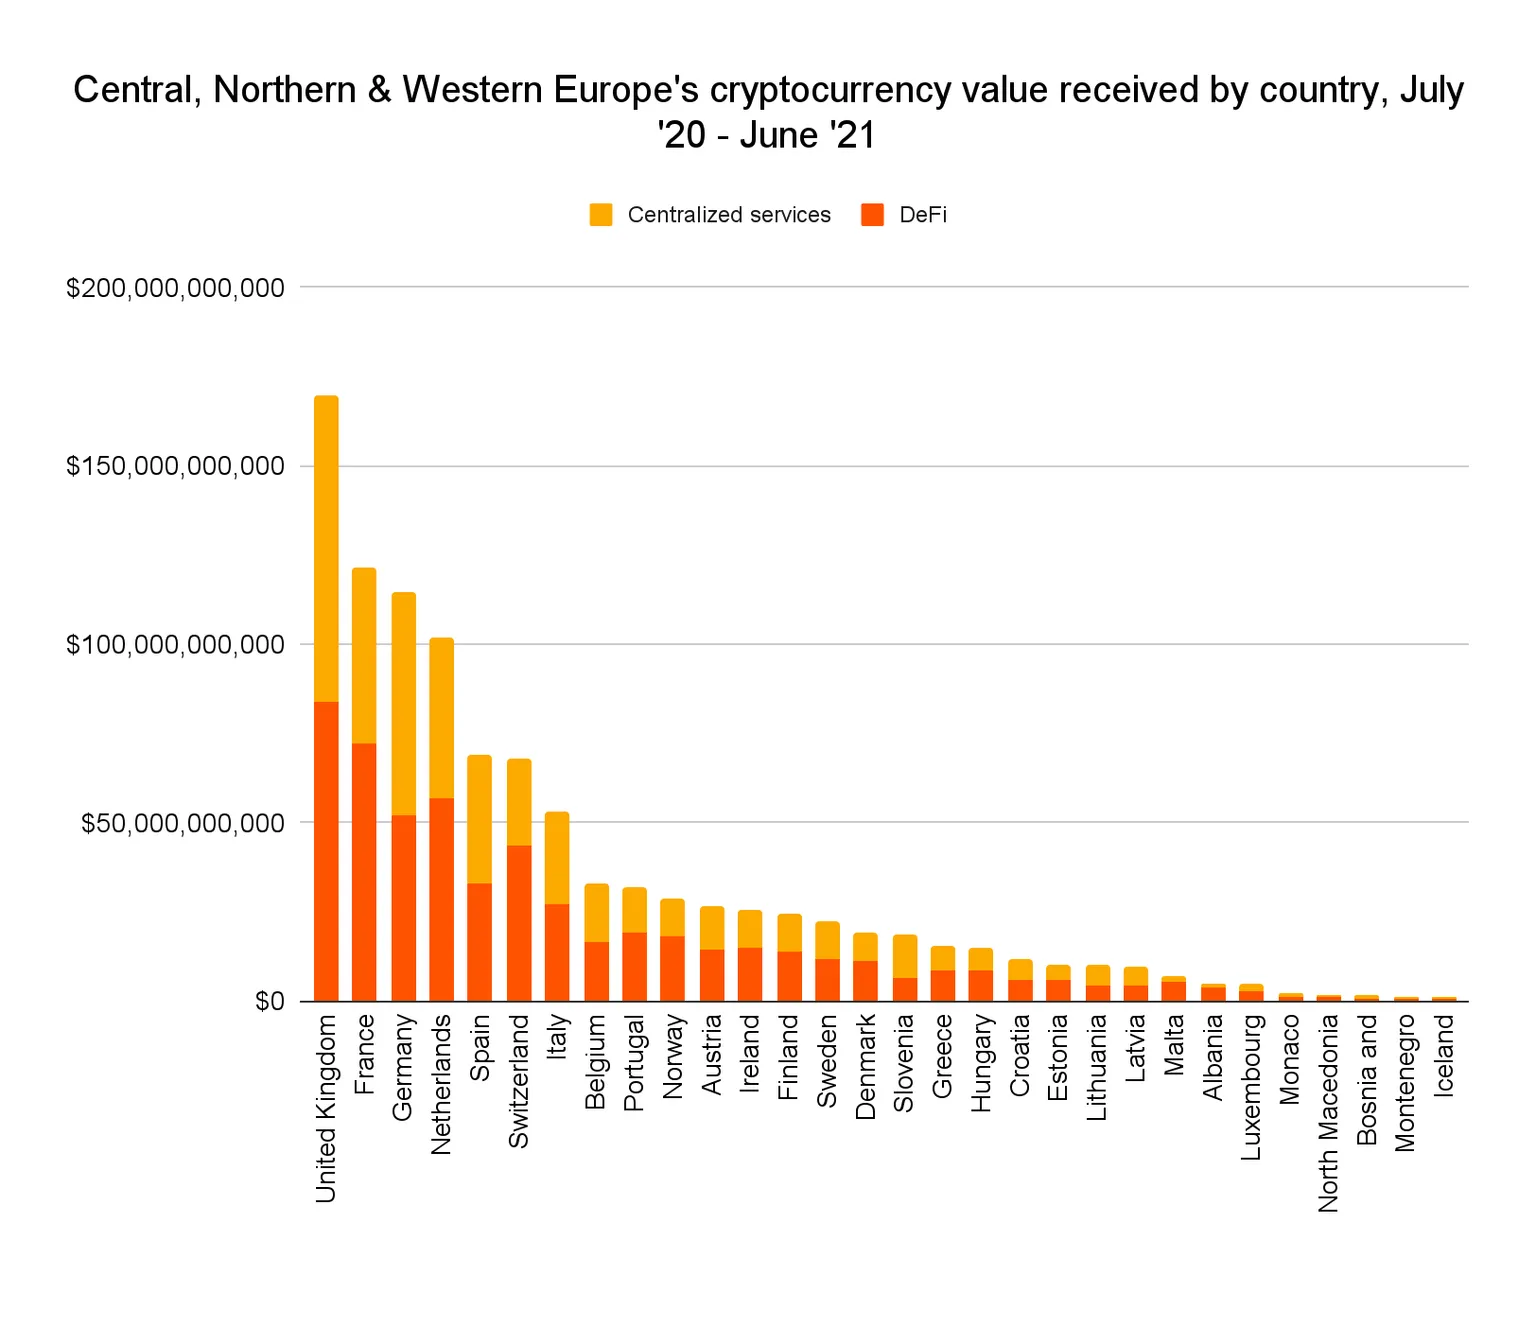 Central, Northern, and Western Europe's crypto value received by country from July 2020 to June 2021